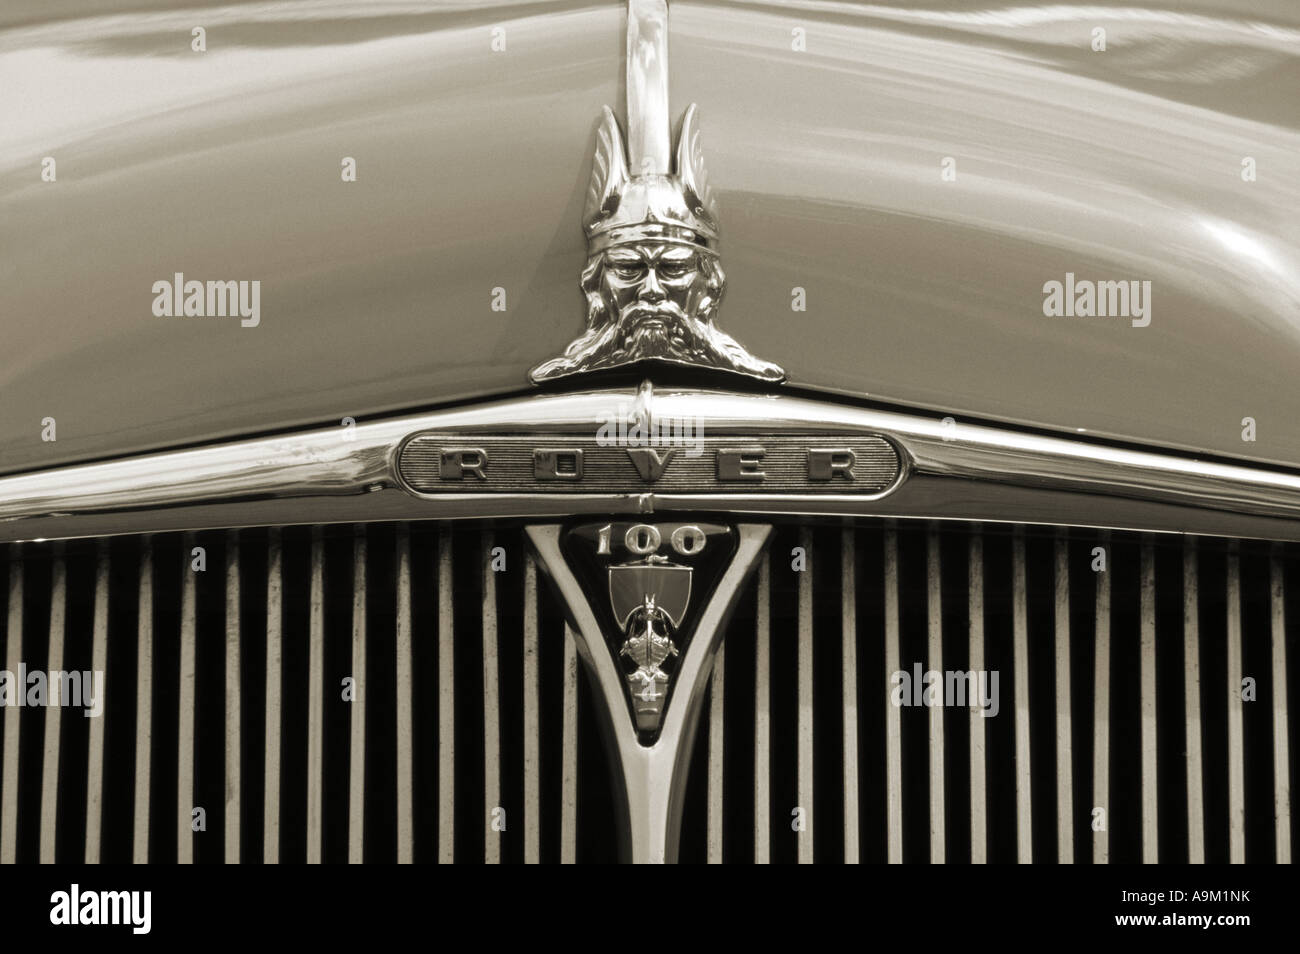 Rover 100 P4 of 1960. English car manufacturer 1904 on. Rover car auto badge marque British maker motif Stock Photo